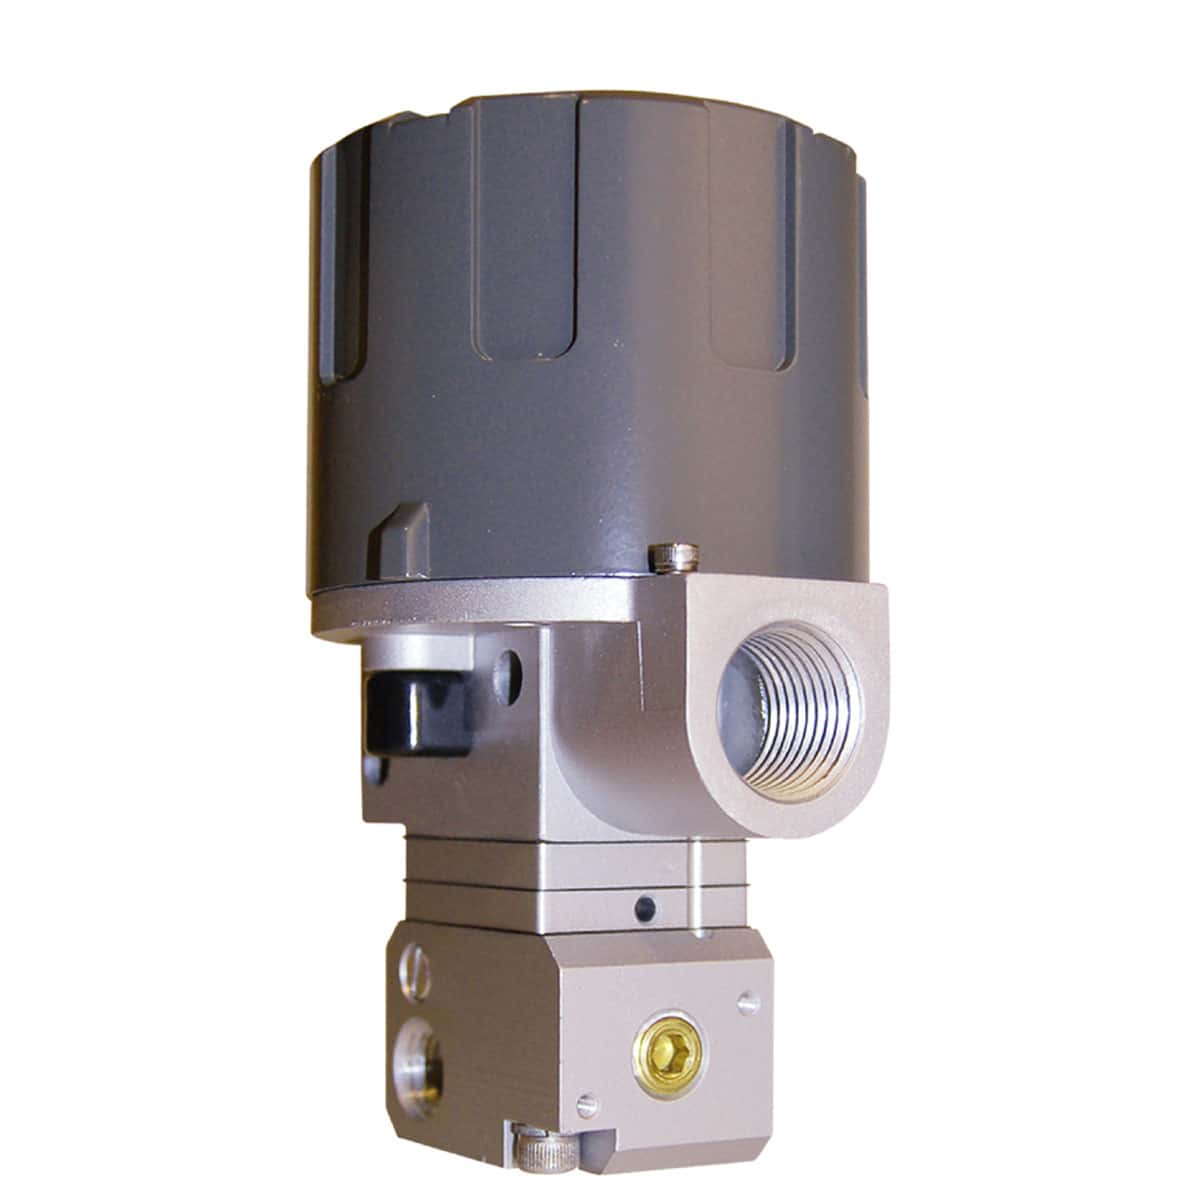 Explosion Proof Transducer Vac to 15 psi